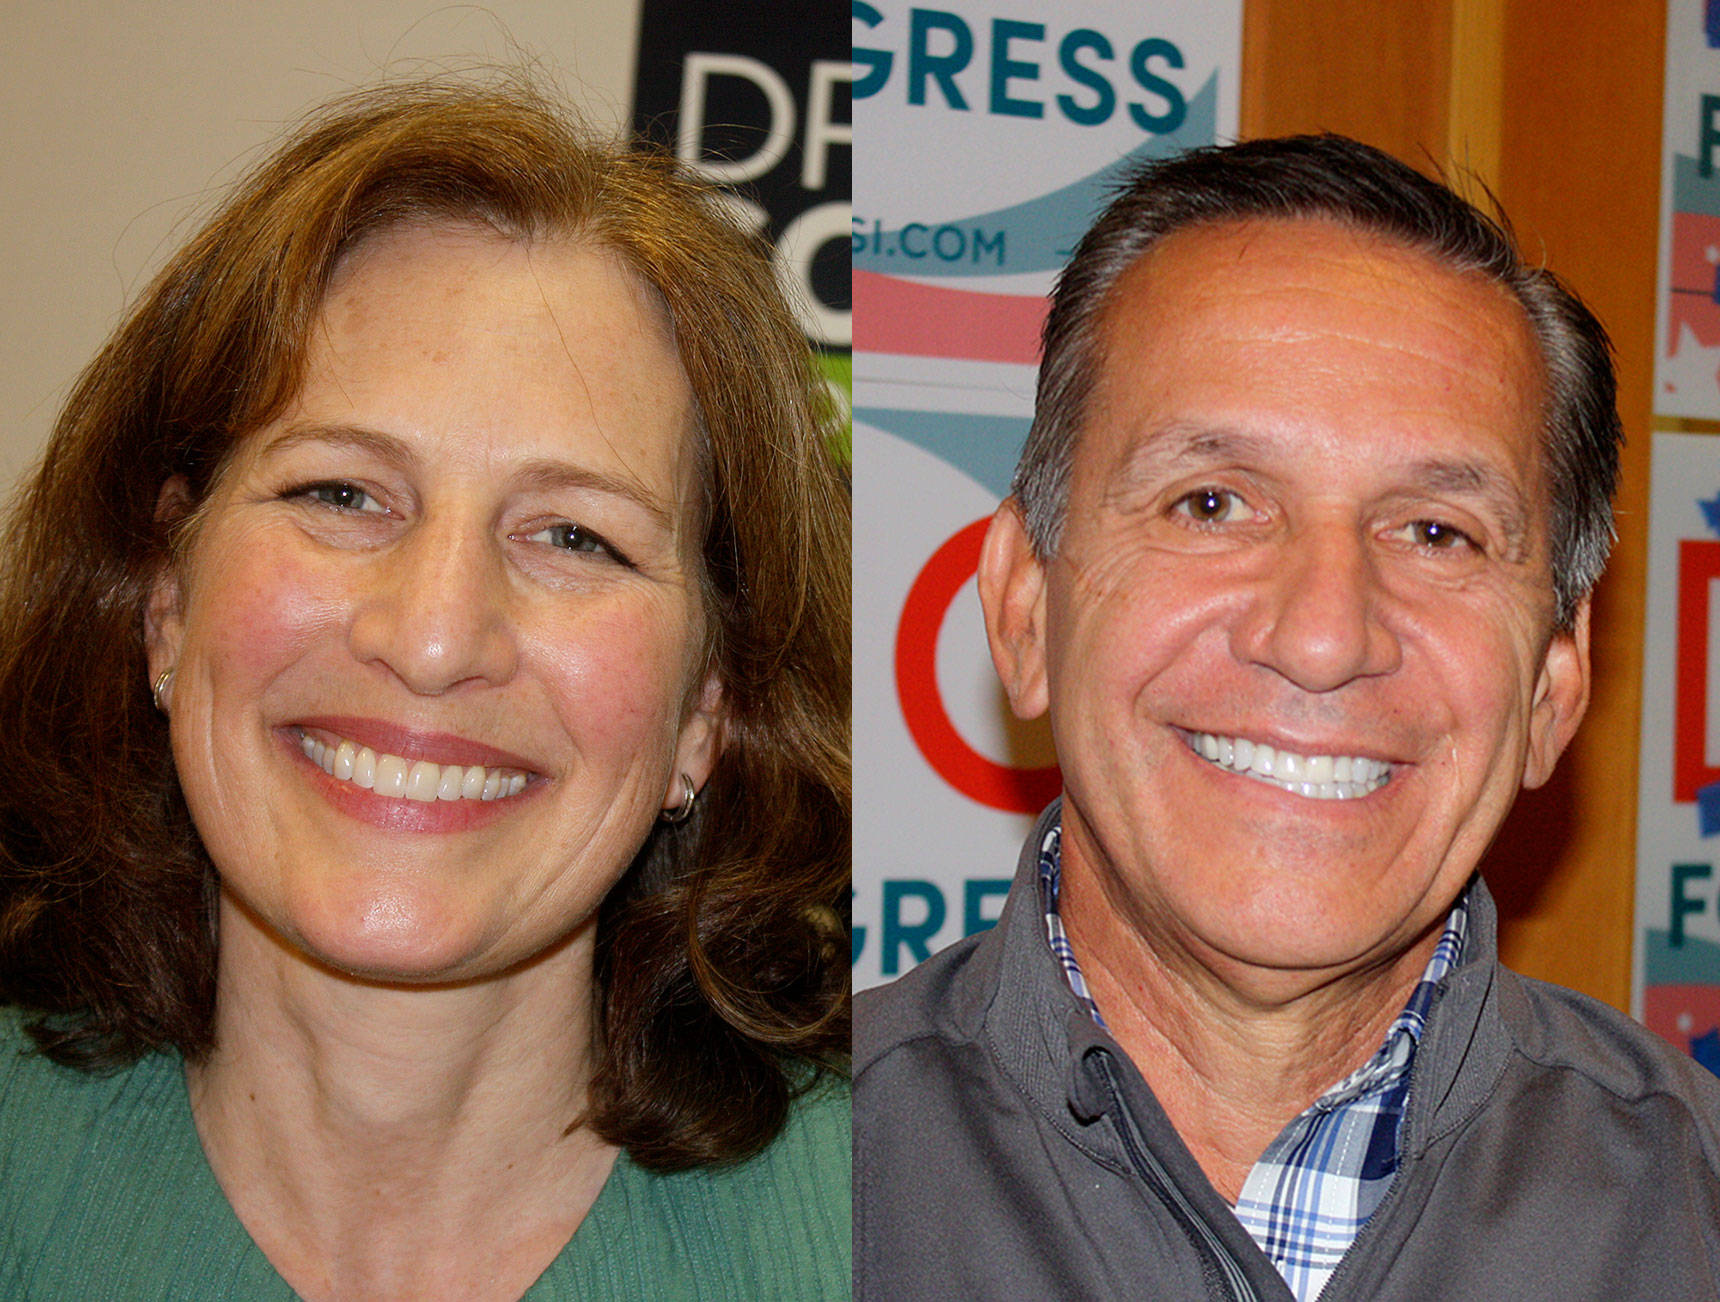 Schrier leads Rossi in hotly-contested 8th Congressional District